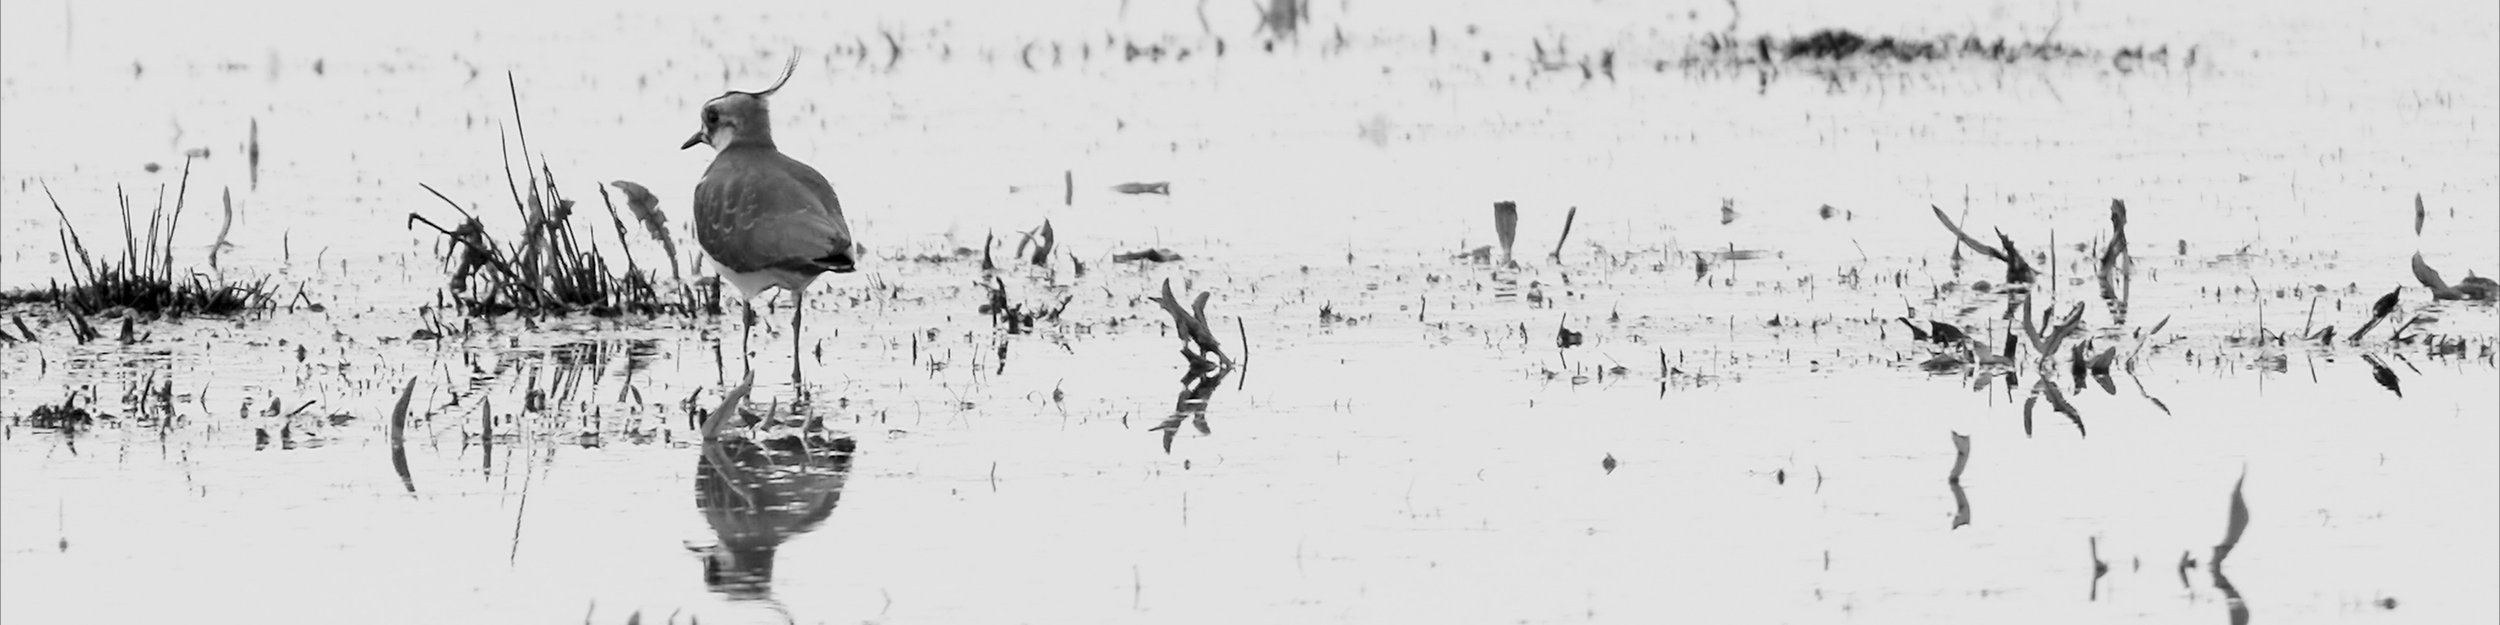 Still from Lapwings at Catcott